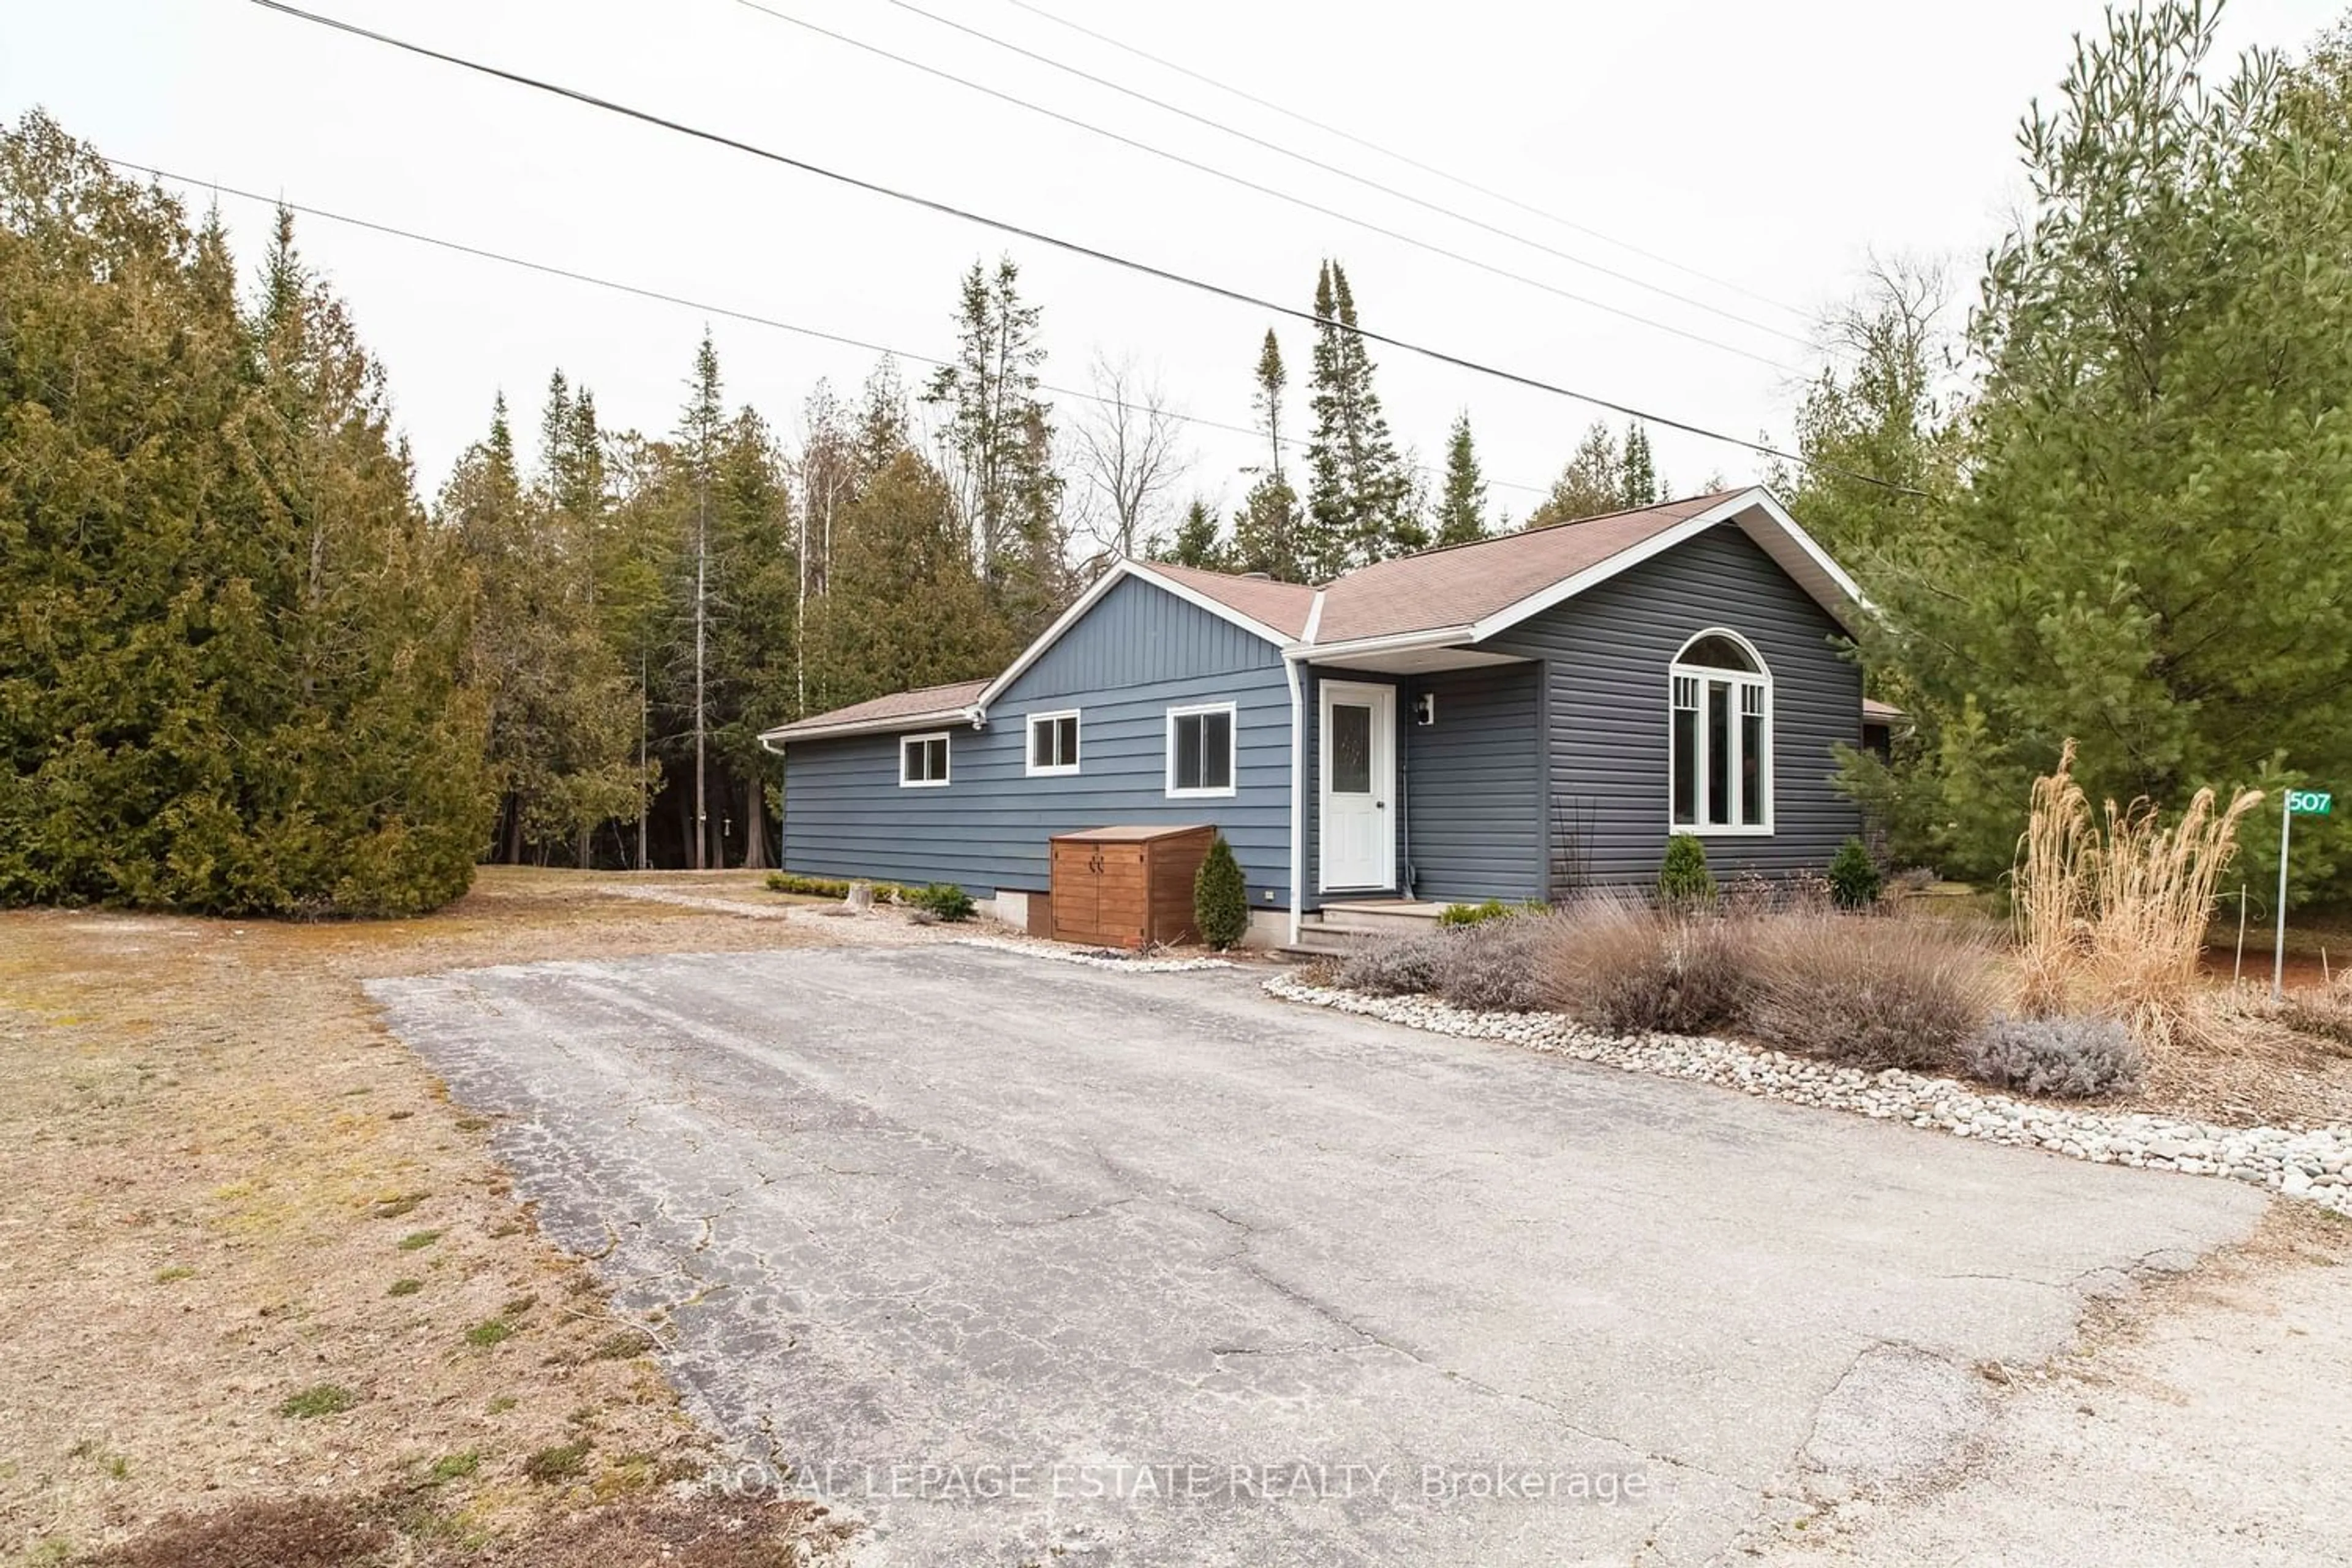 Cottage for 507 3rd Ave, South Bruce Peninsula Ontario N0H 2G0